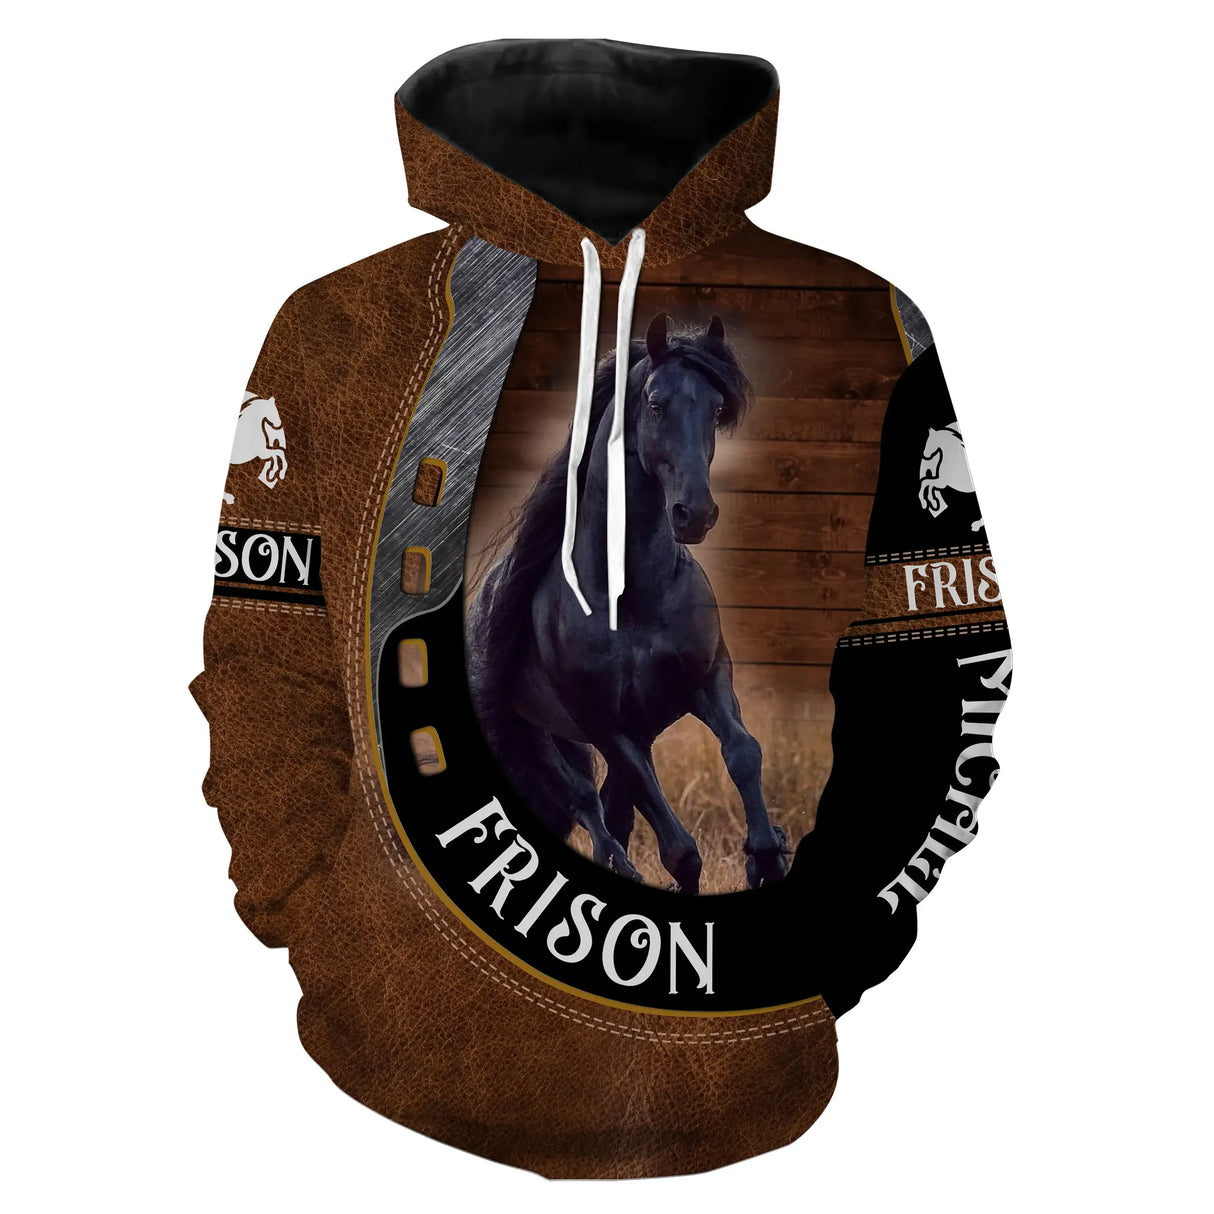 Friesian Horse, Saddle Horse Breed, Personalized Horse Riding Gift, Passion Horses, Love Friesian - CT05072206